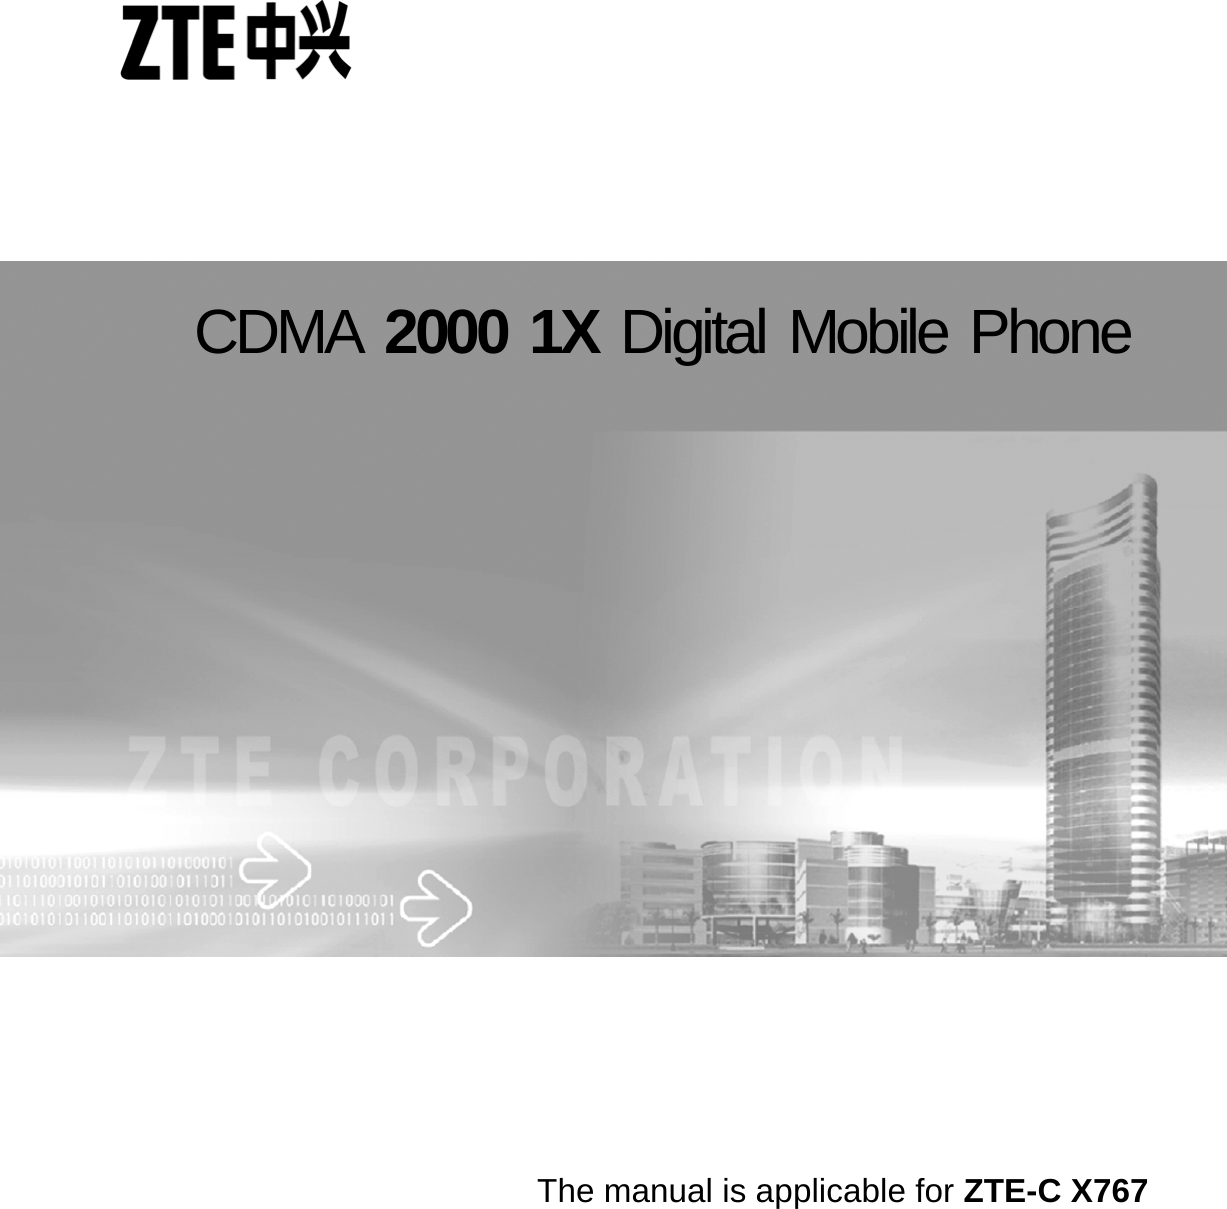          The manual is applicable for ZTE-C X767  CDMA2000 1X Digital Mobile Phone